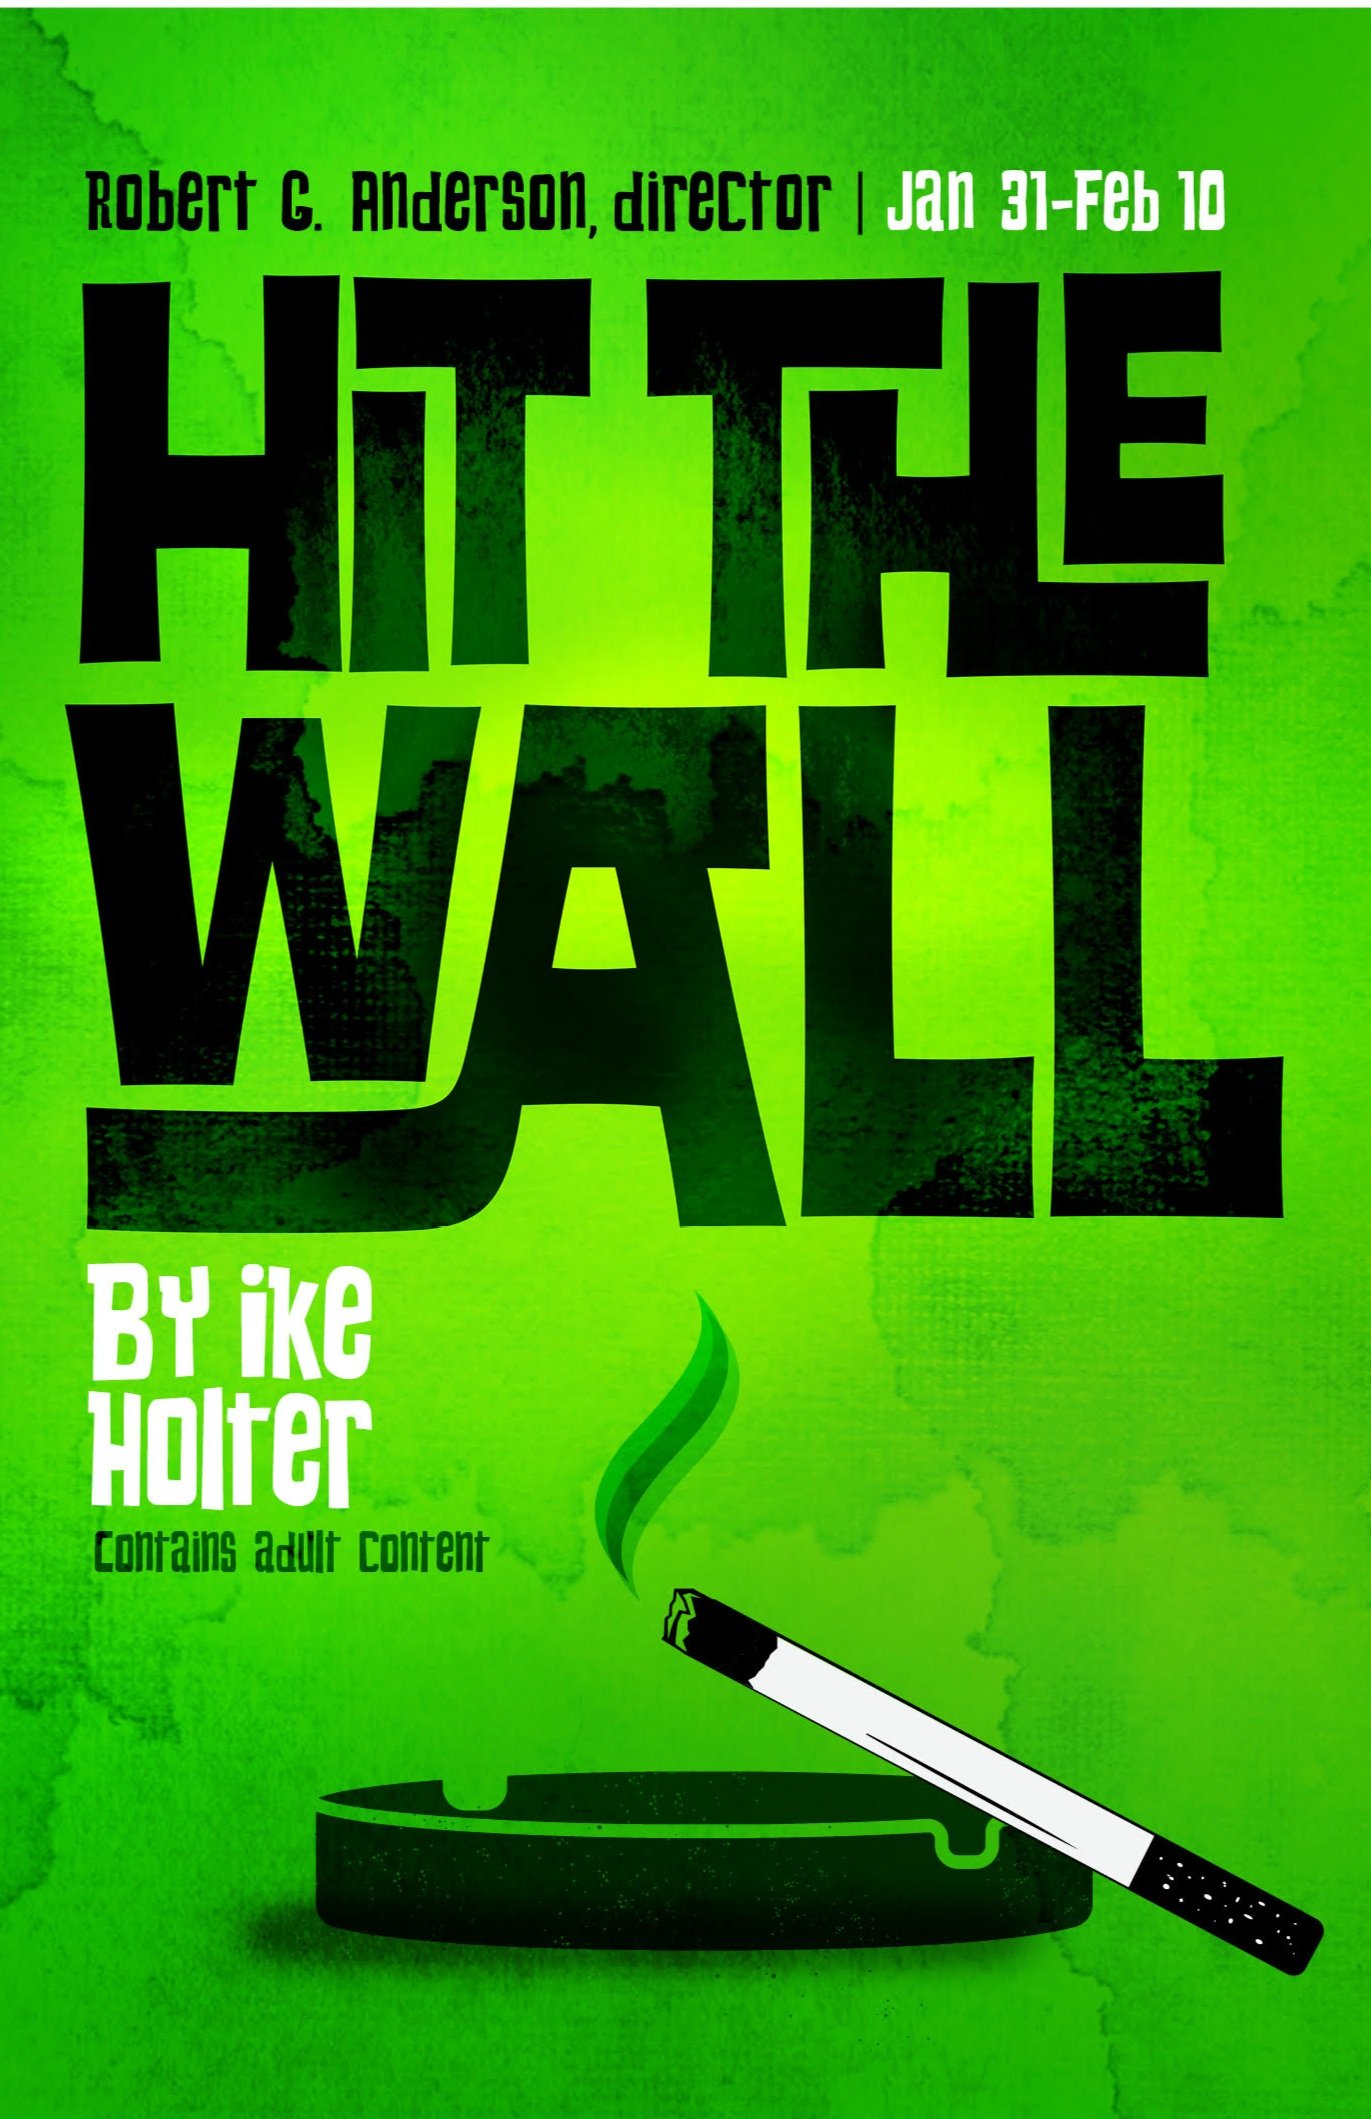 Hit-The-Wall-Poster-1.jpg